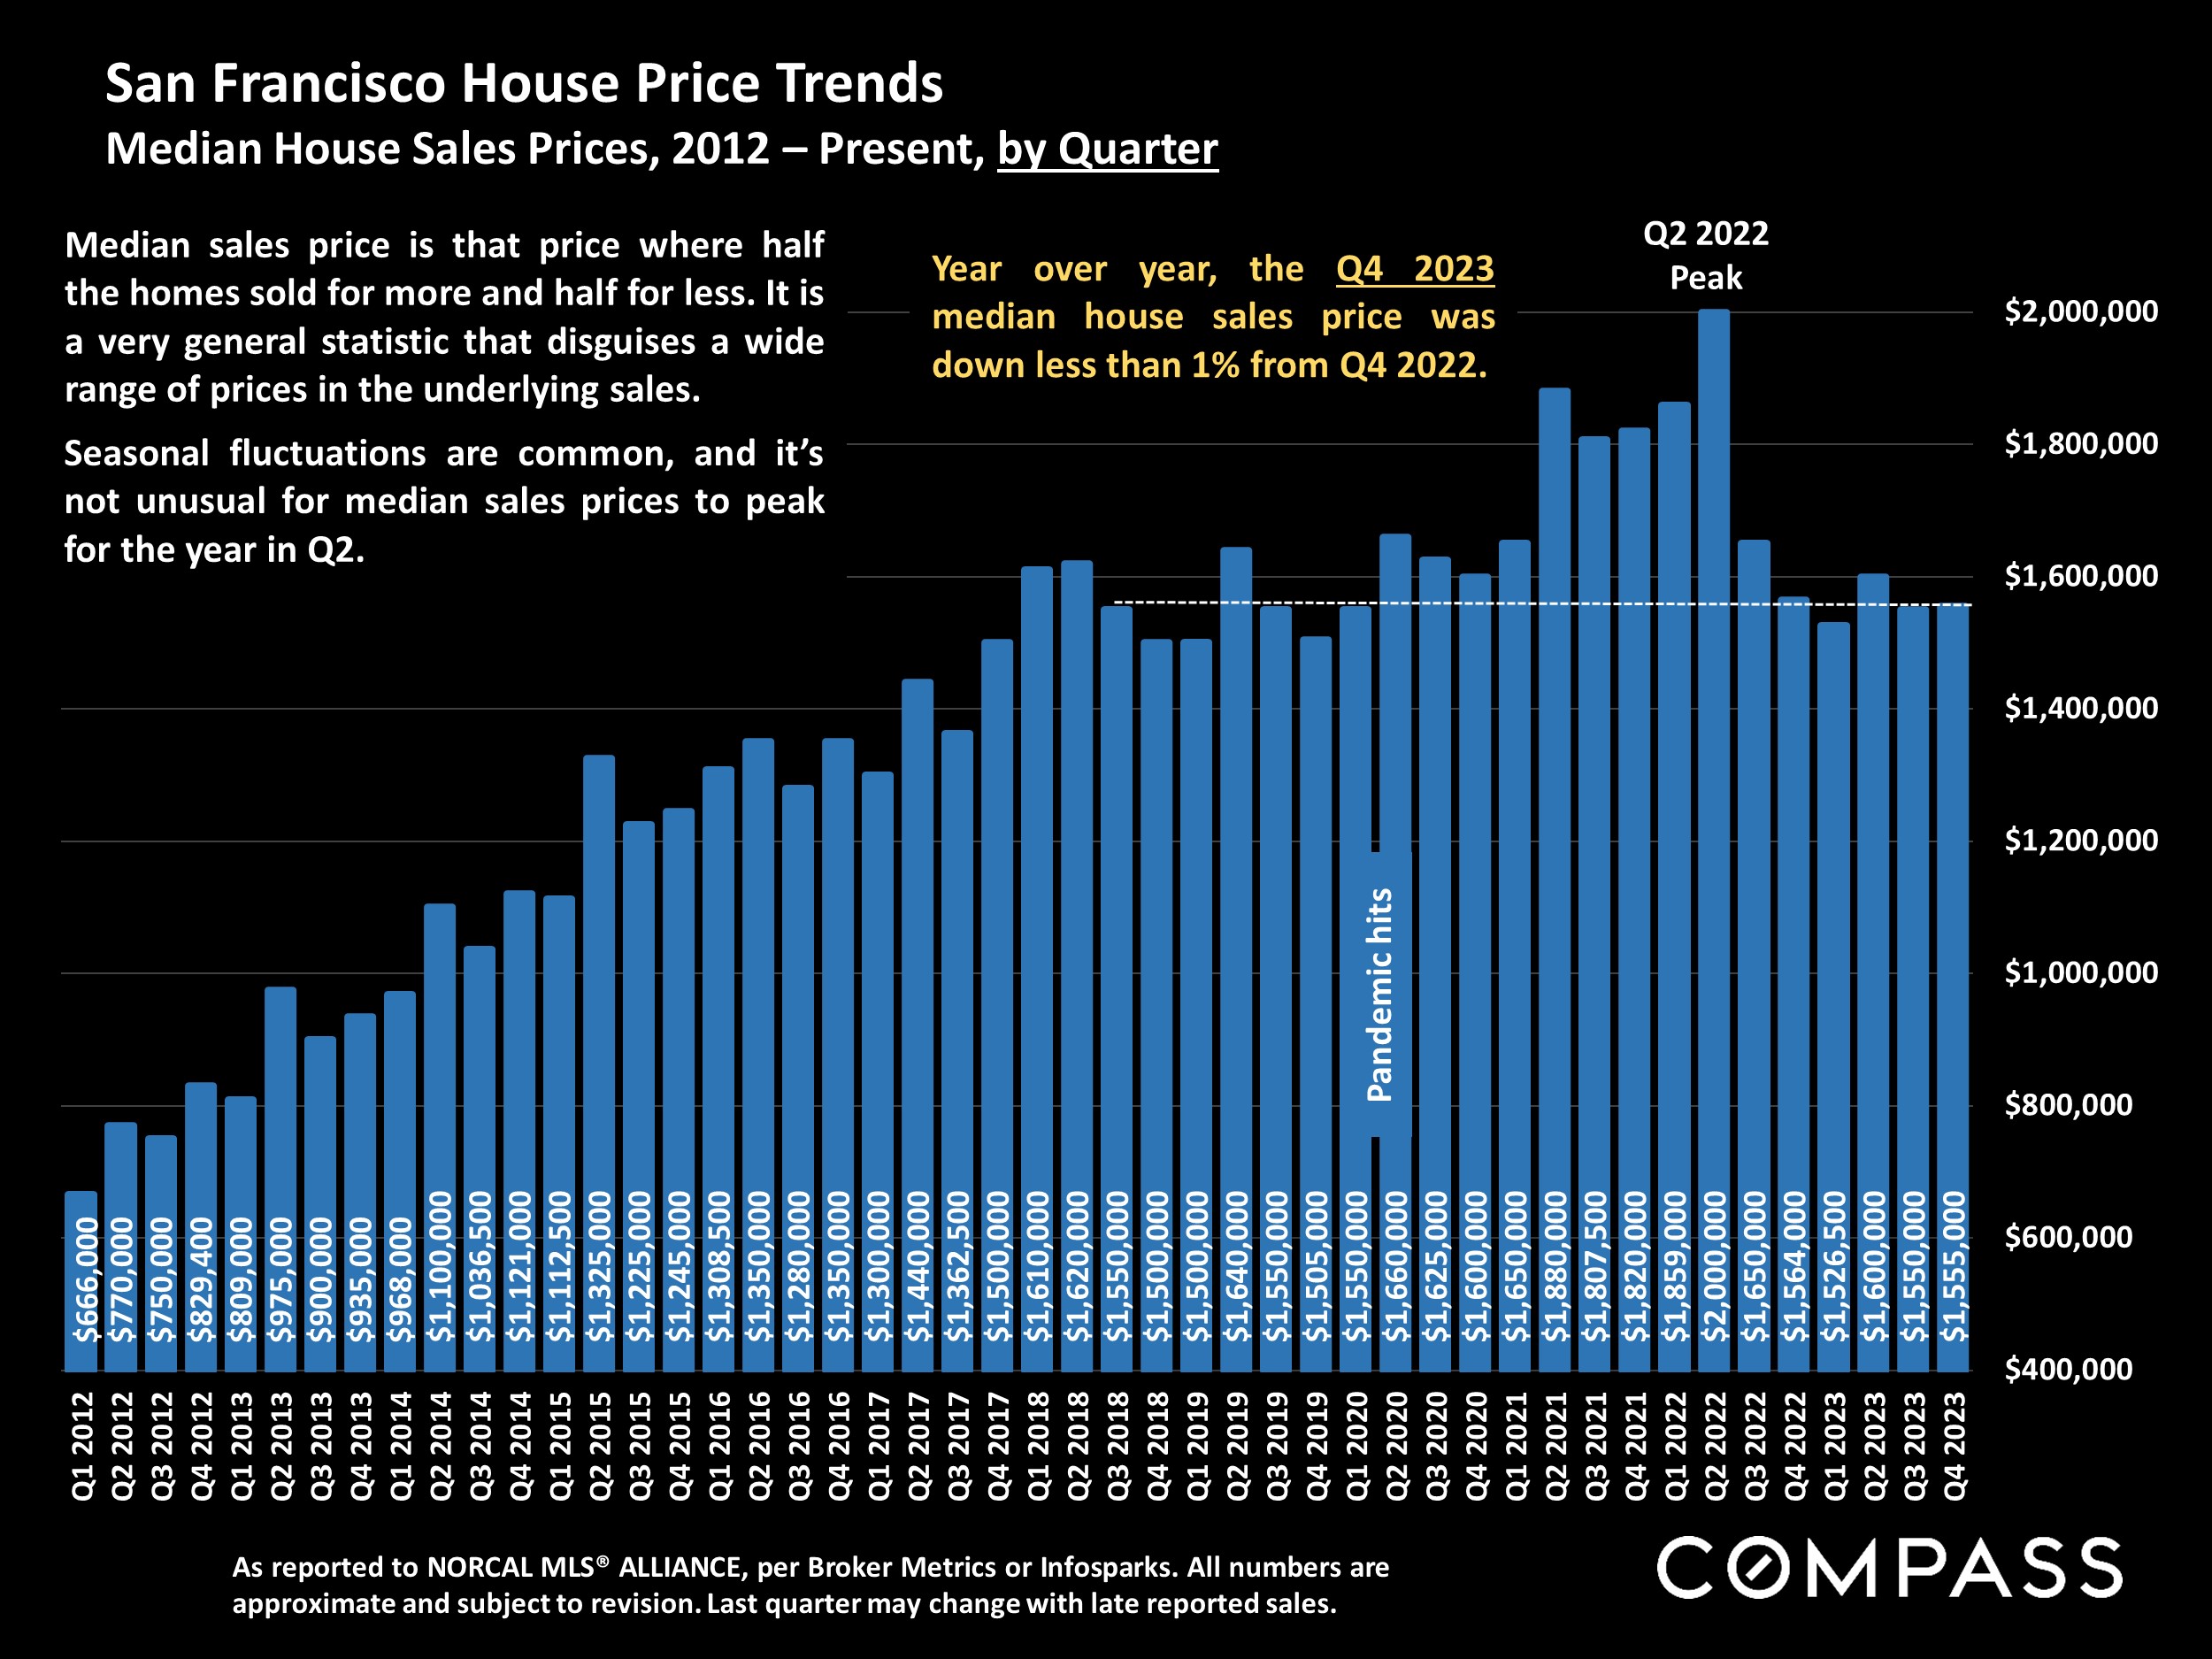 San Francisco House Price Trends.Median House Sales Prices, 2012 - Present, by Quarter